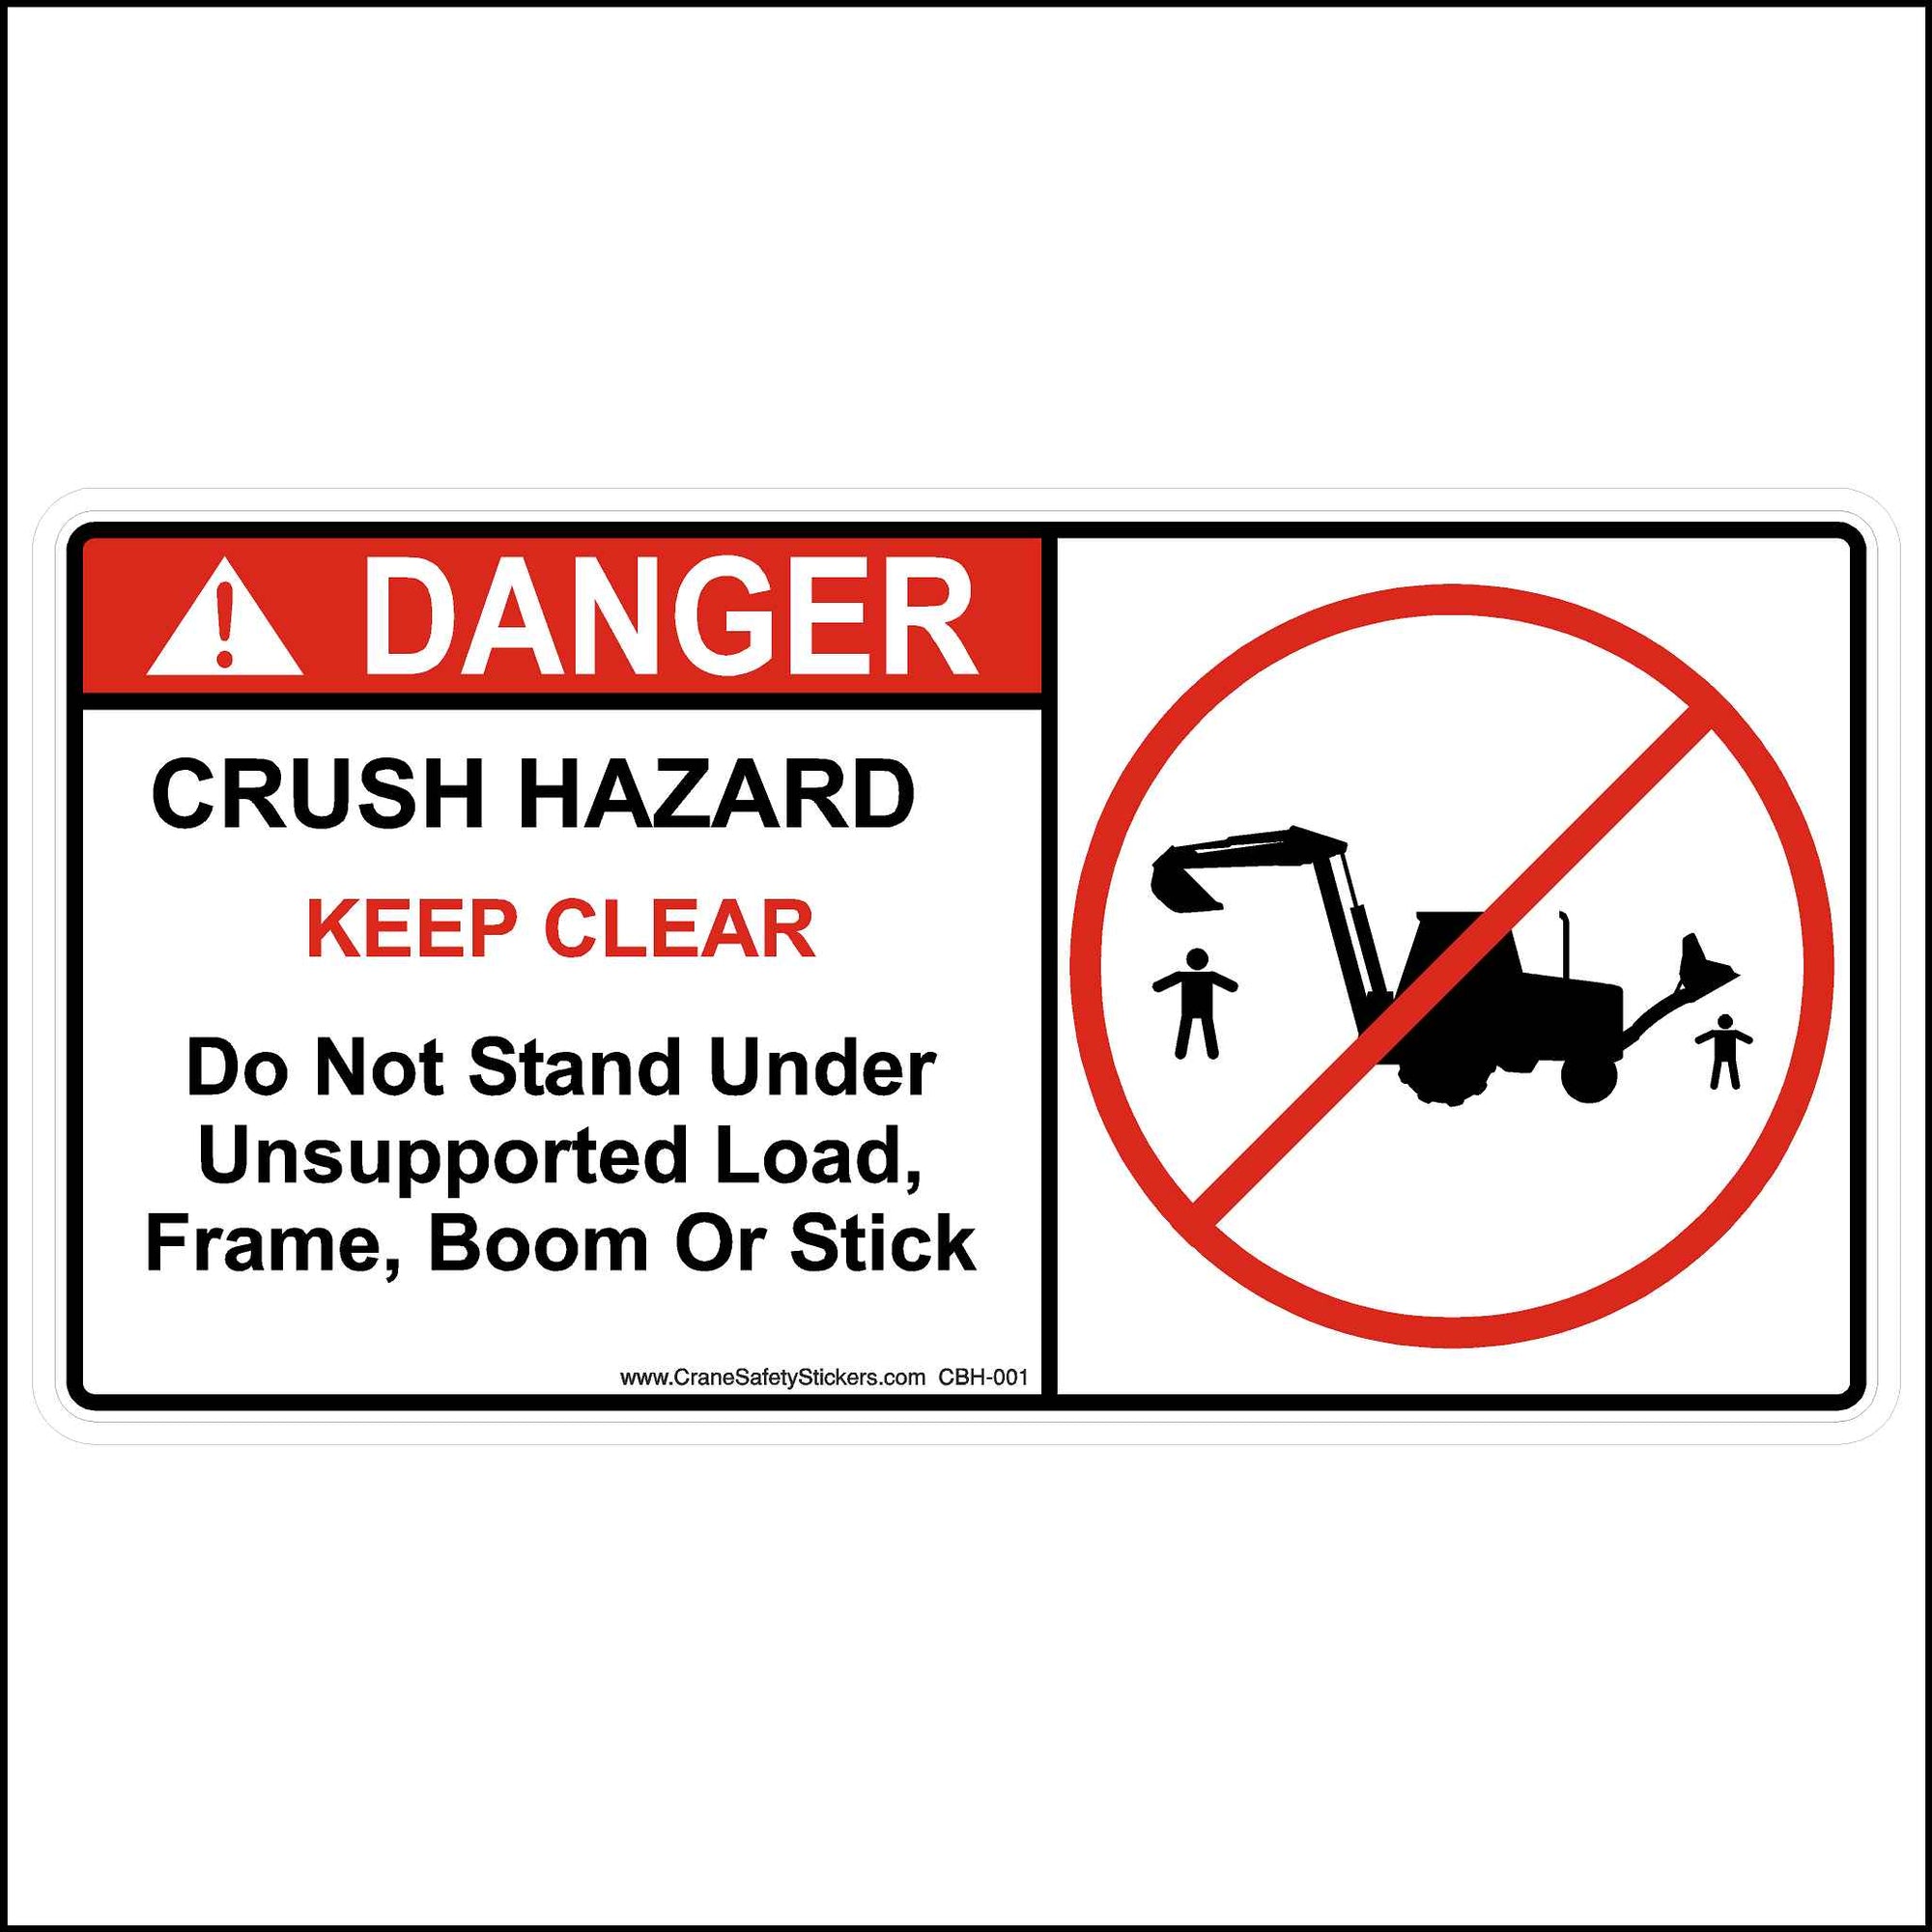 Backhoe Decal Printed With, DANGER, Crush Hazard, Keep Clear, Do Not Stand Under Unsupported Load, Frame, Boom or Stick.